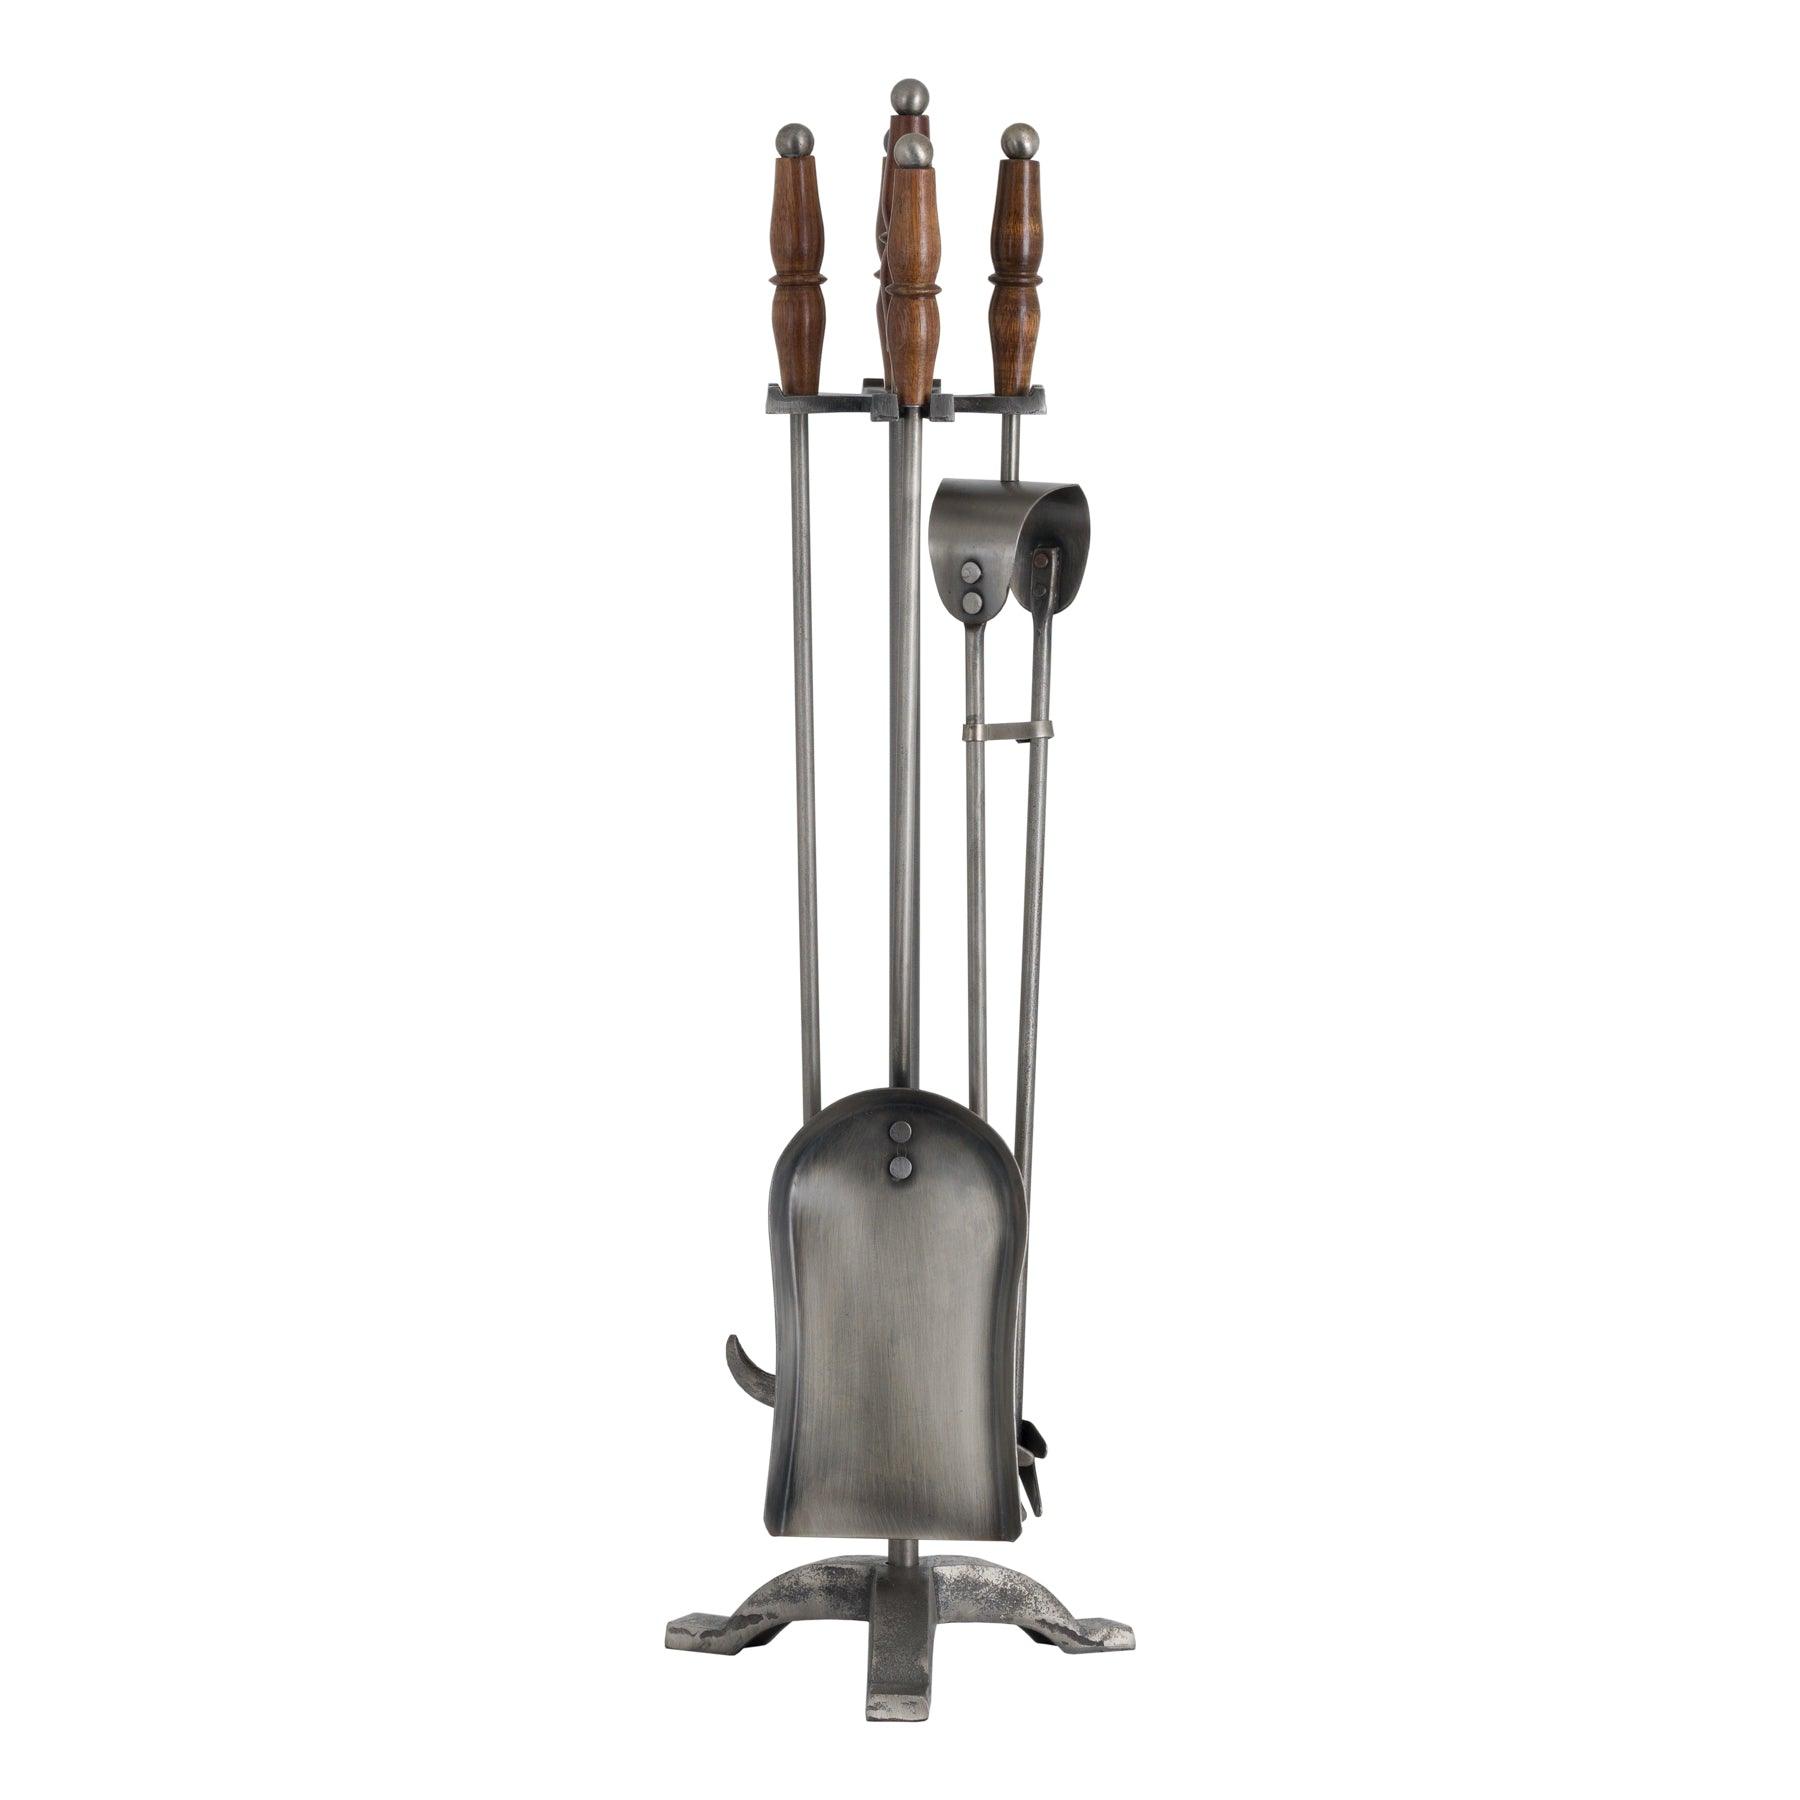 Hand Turned Fire Companion Set In Antique Pewter With Wooden Handles - Vookoo Lifestyle